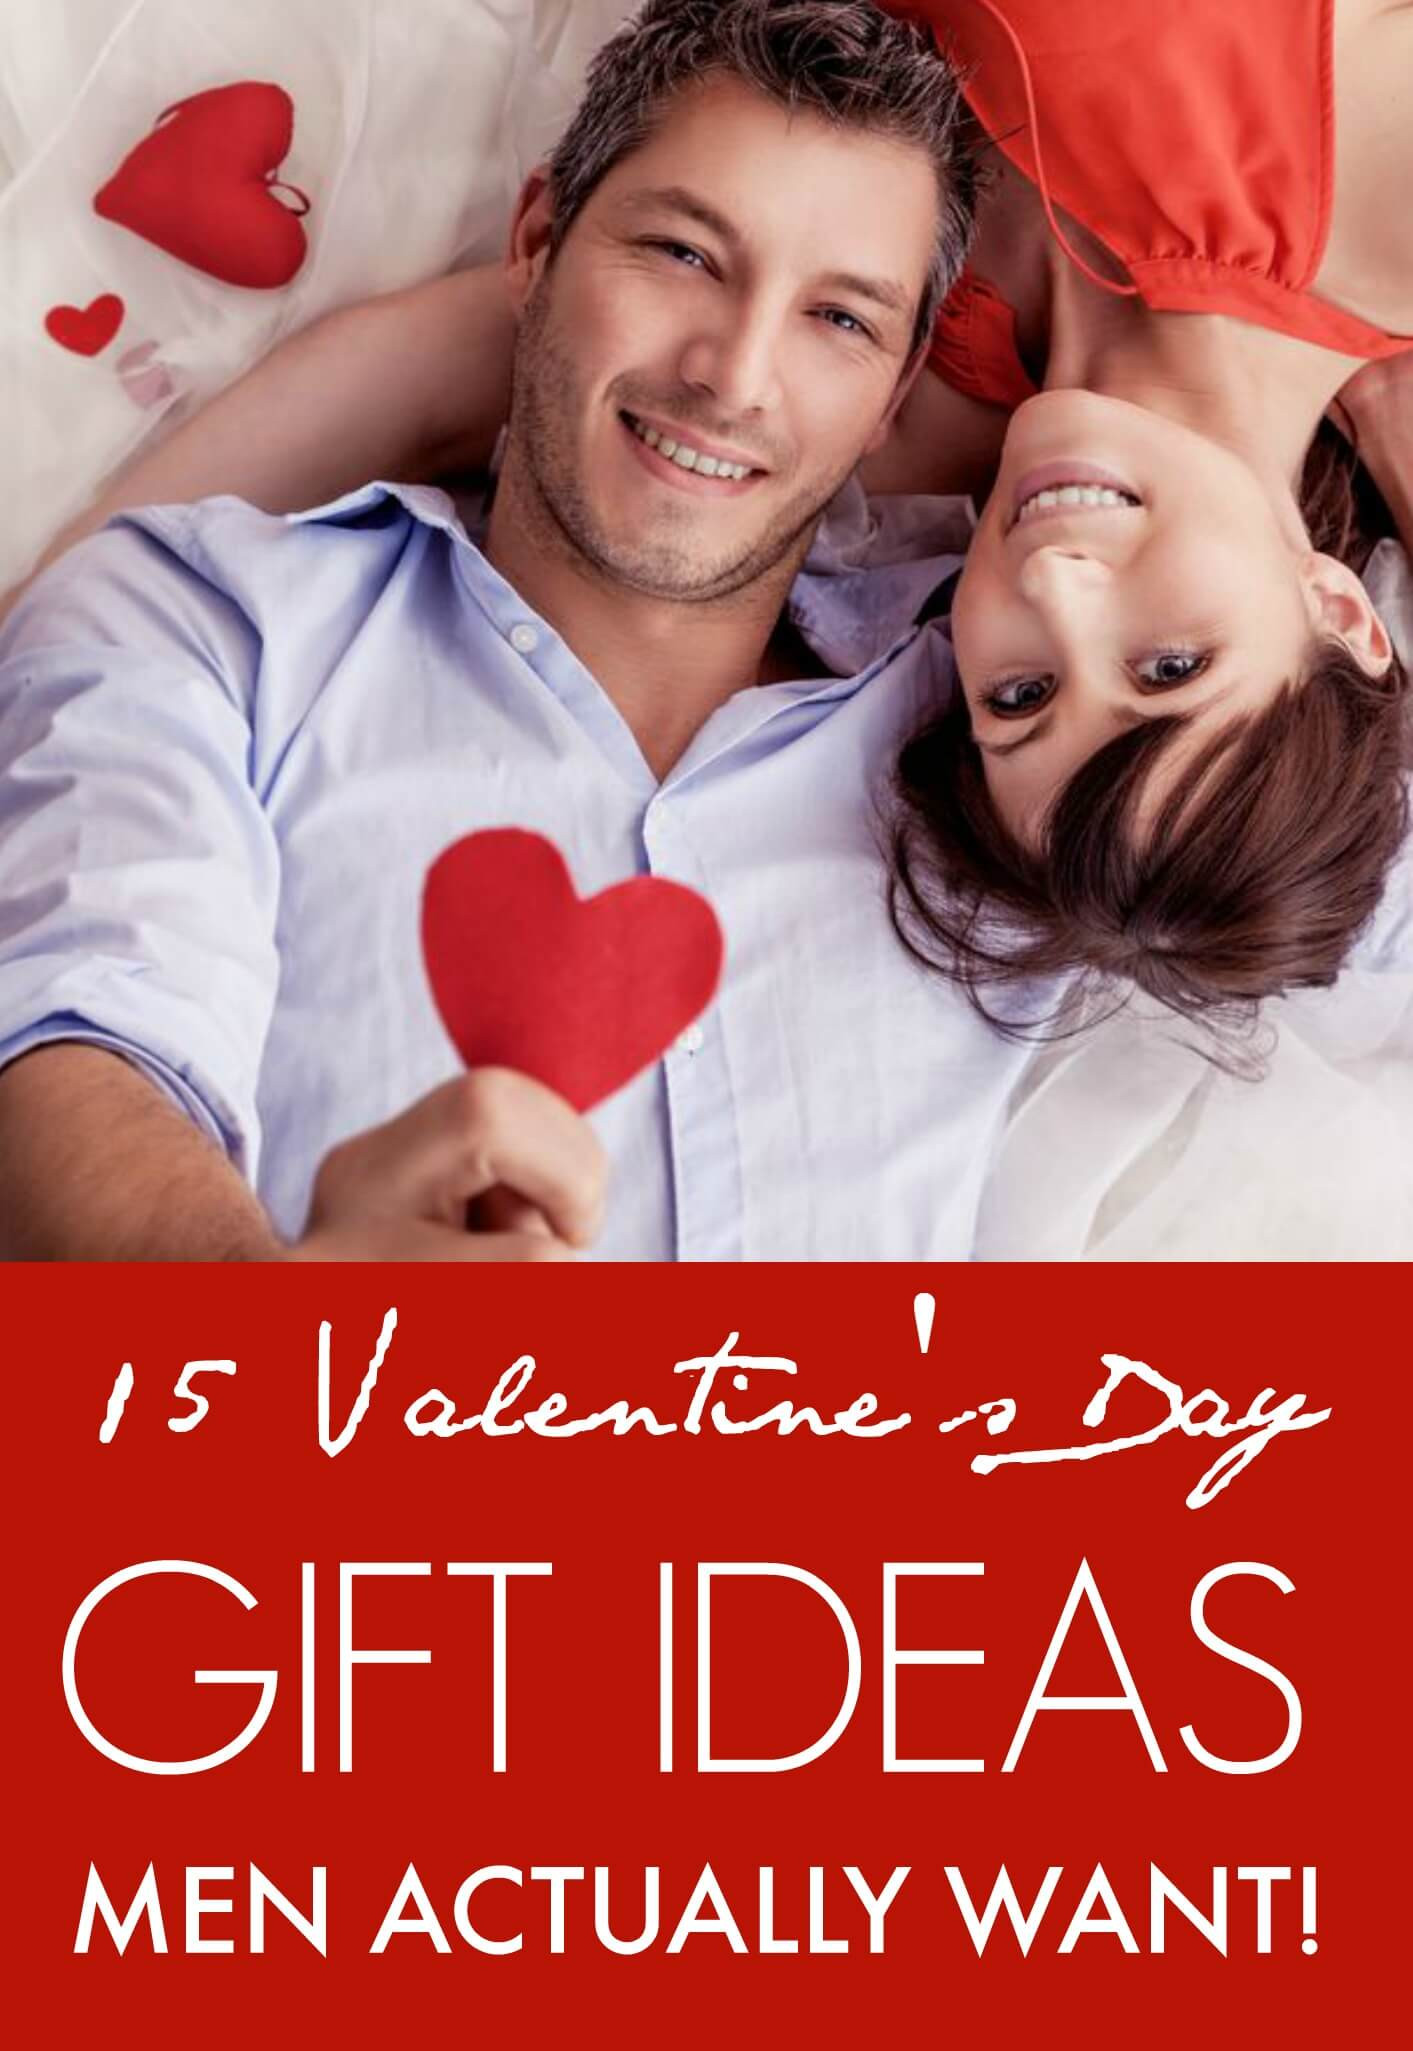 Man Valentines Day Gift Ideas
 15 Valentine’s Day Gift ideas Men Actually Want